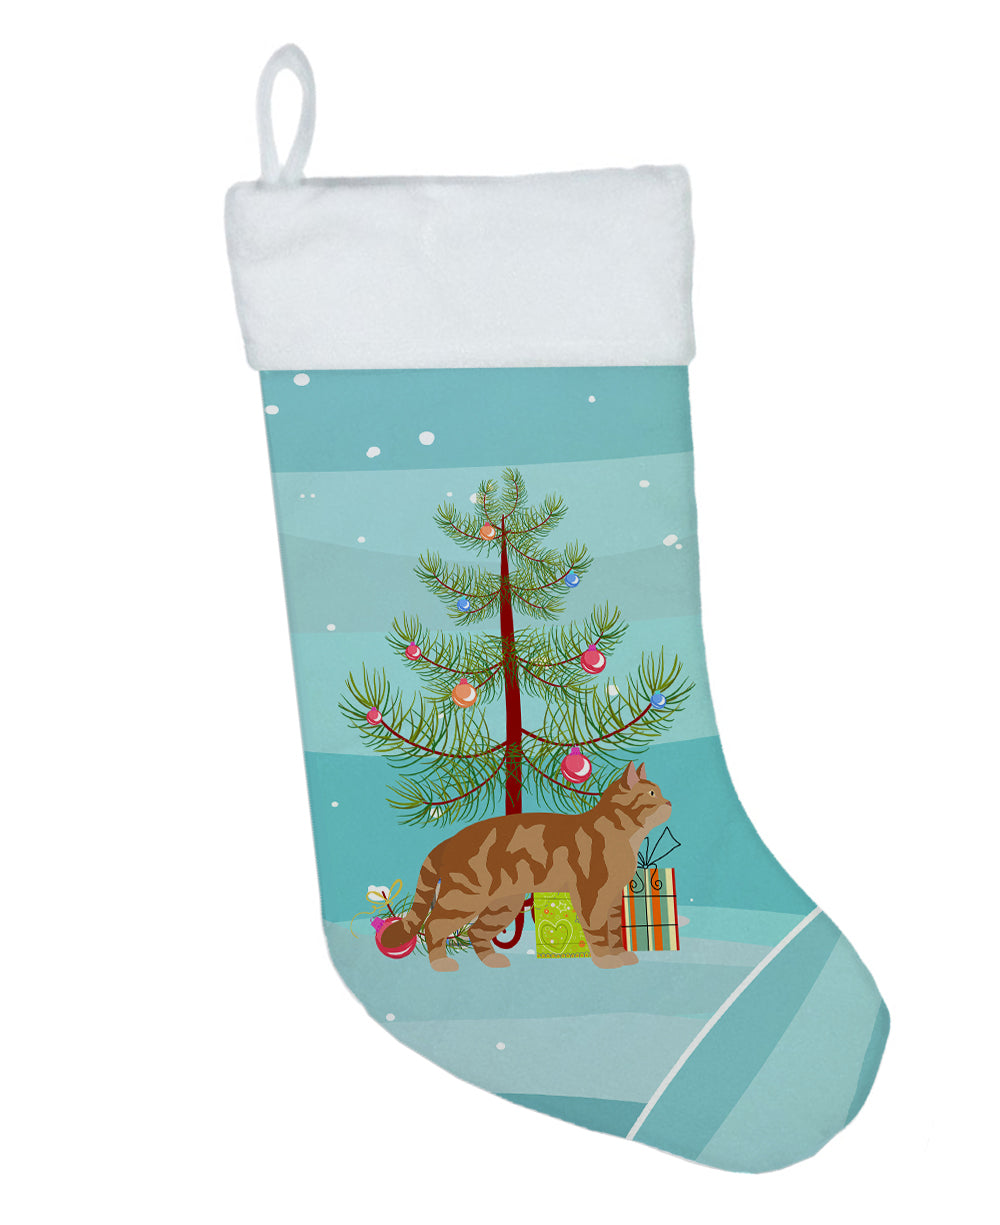 American Wirehair #2 Cat Merry Christmas Christmas Stocking  the-store.com.